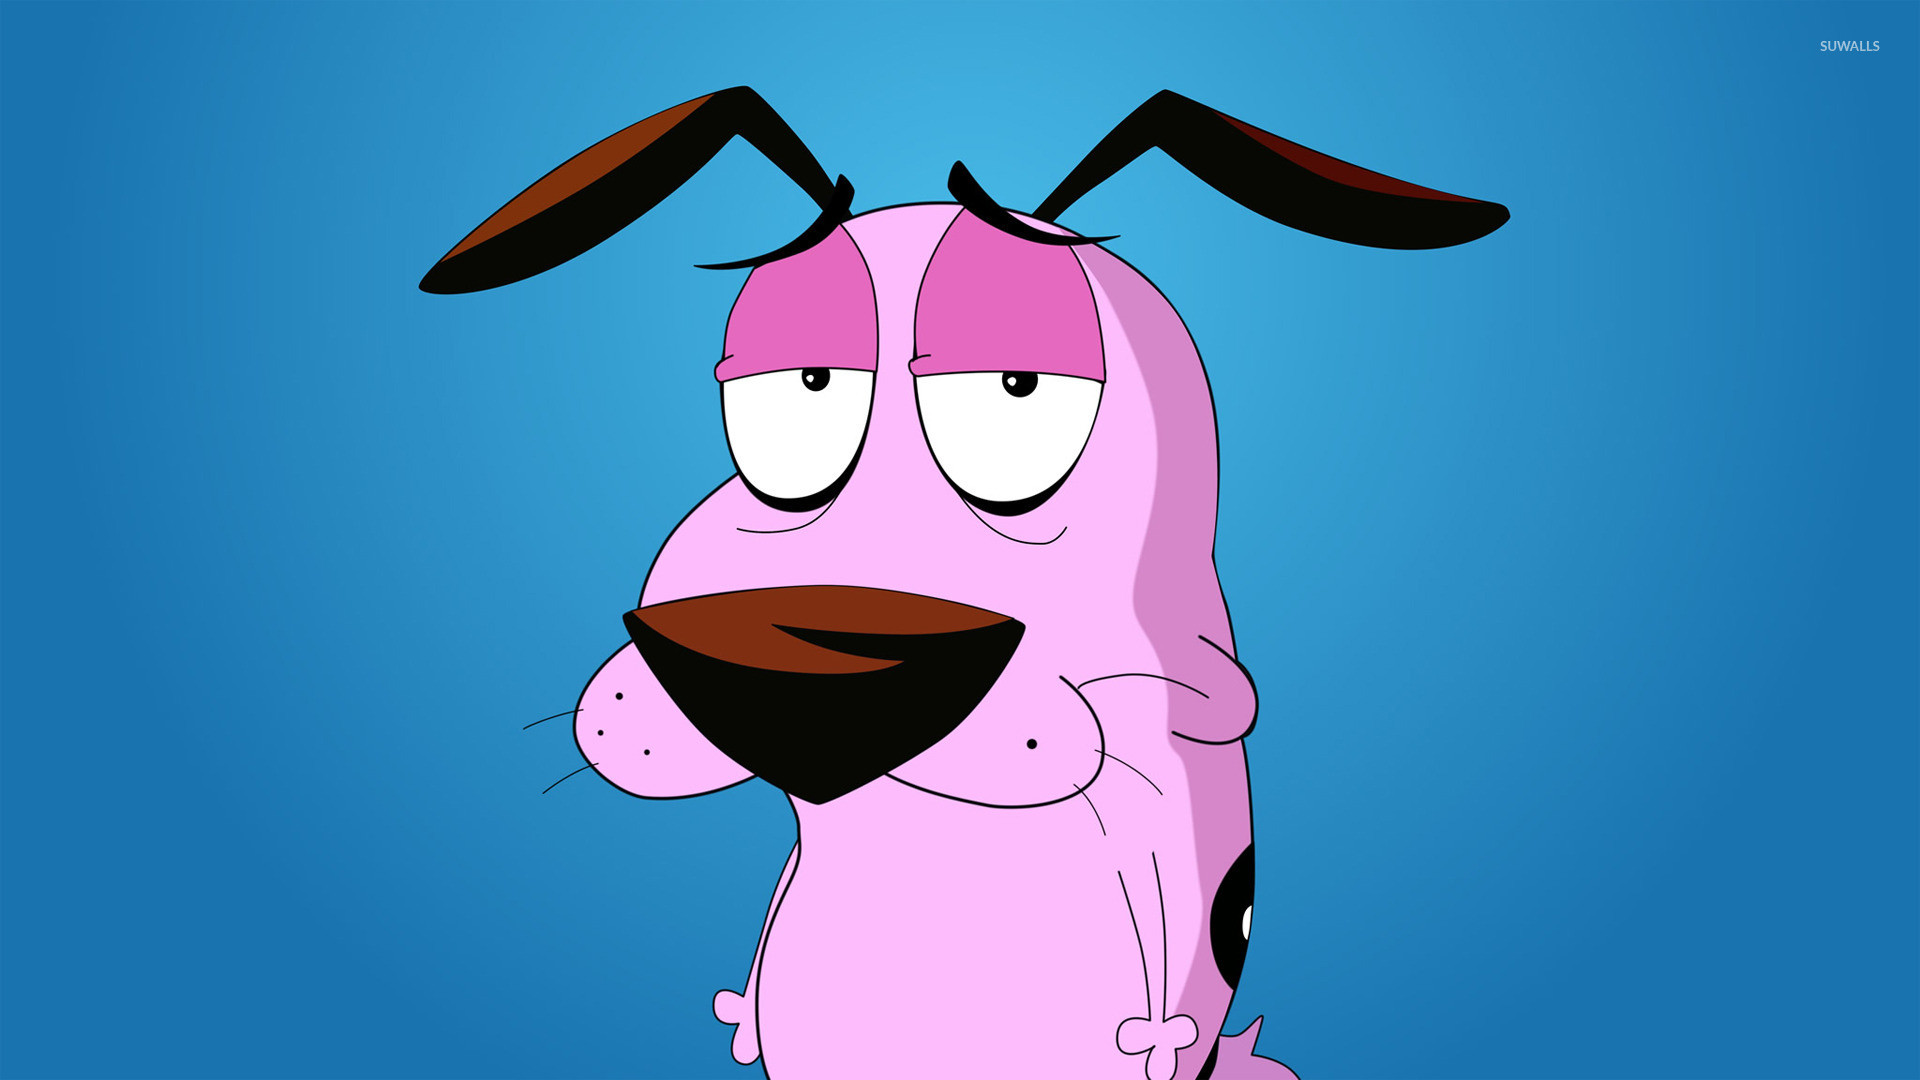 1920x1080 Courage - Courage the Cowardly Dog wallpaper  jpg